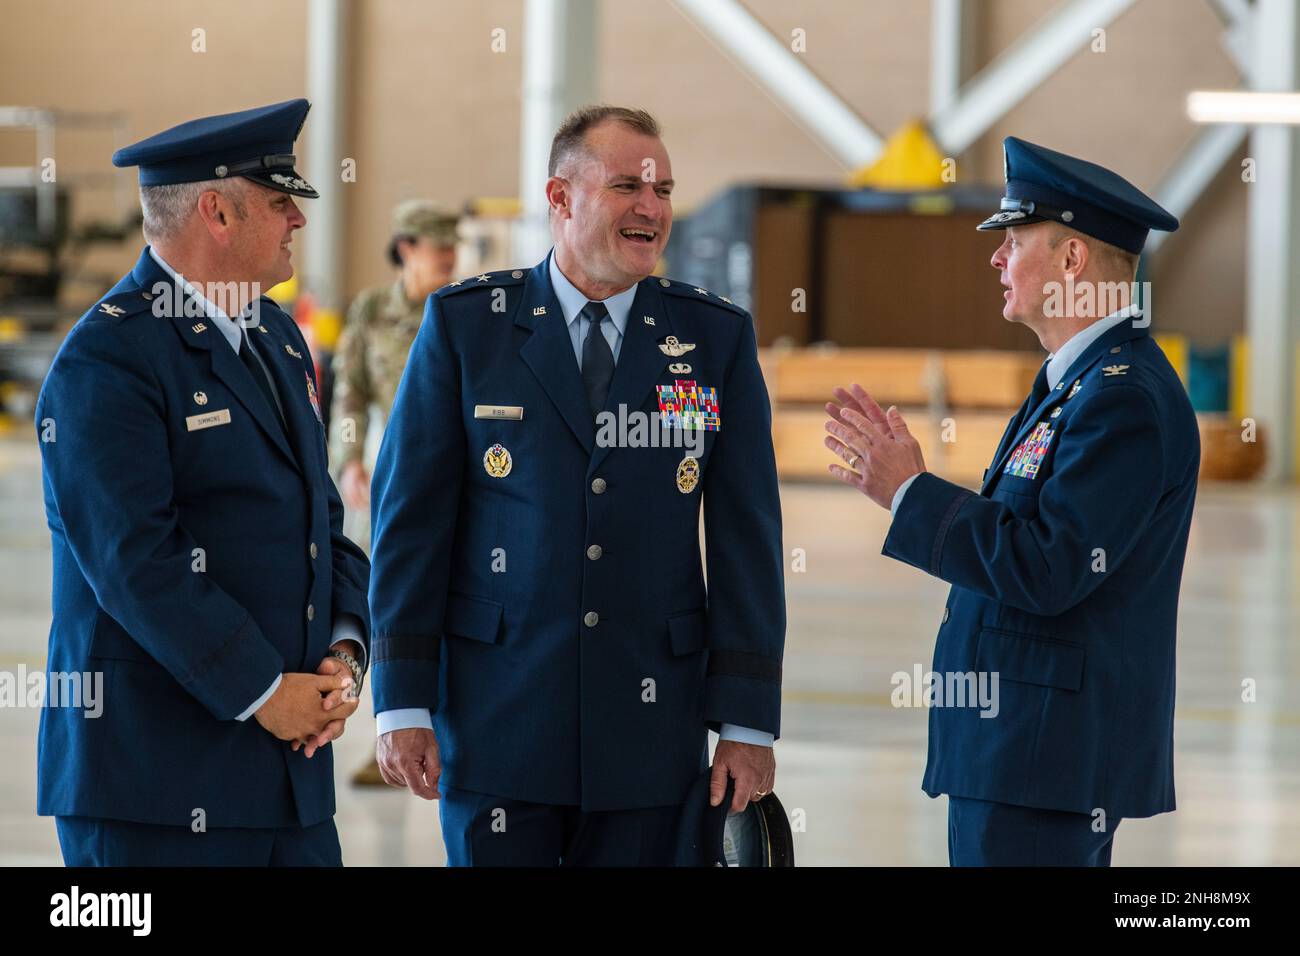 From left to right, U.S. Air Force Col. Corey Simmons, outgoing 60th Air Mobility Wing commander, Maj. Gen. Kenneth Bibb, 18th Air Force commander, and Col. Derek Salmi, incoming 60th Air Mobility Wing commander, visit with each other prior to the wing change of command ceremony at Travis Air Force Base, California, July 27, 2022. A change of command ceremony is a military tradition of formal transfer of command, responsibilities and authority from one commander to another. Stock Photo